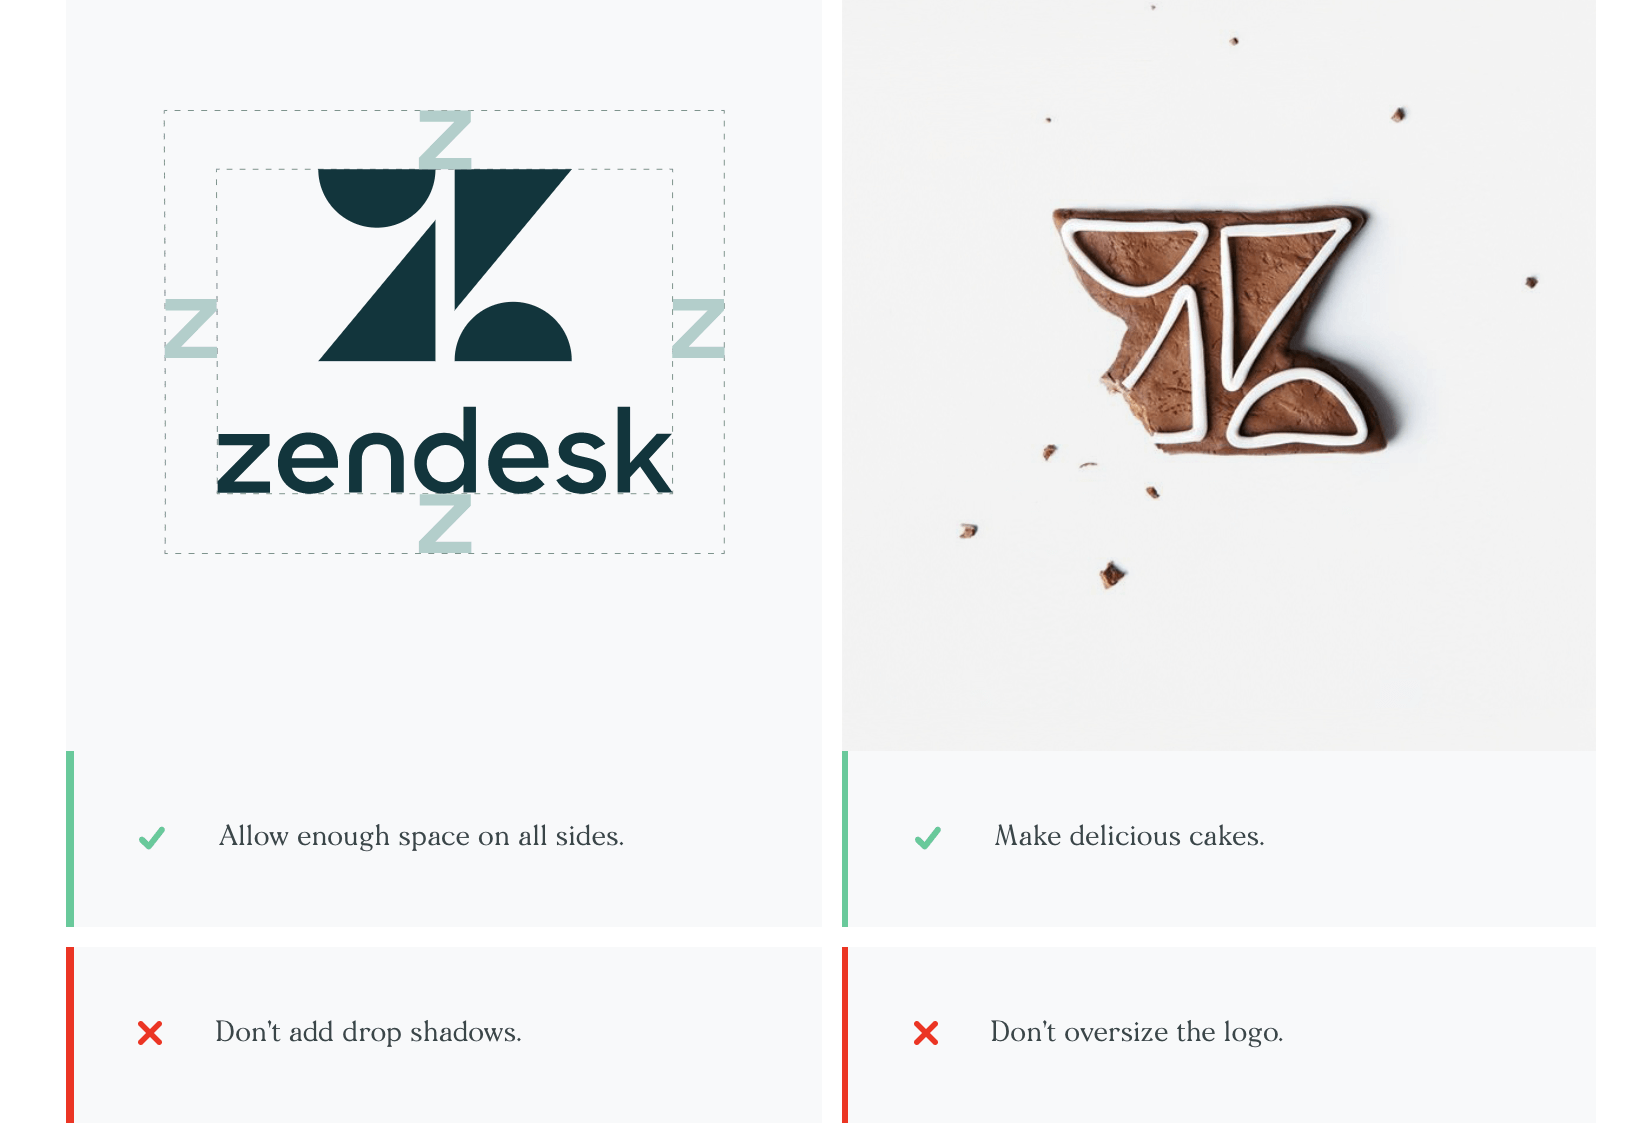 zendesk style guide example - tips